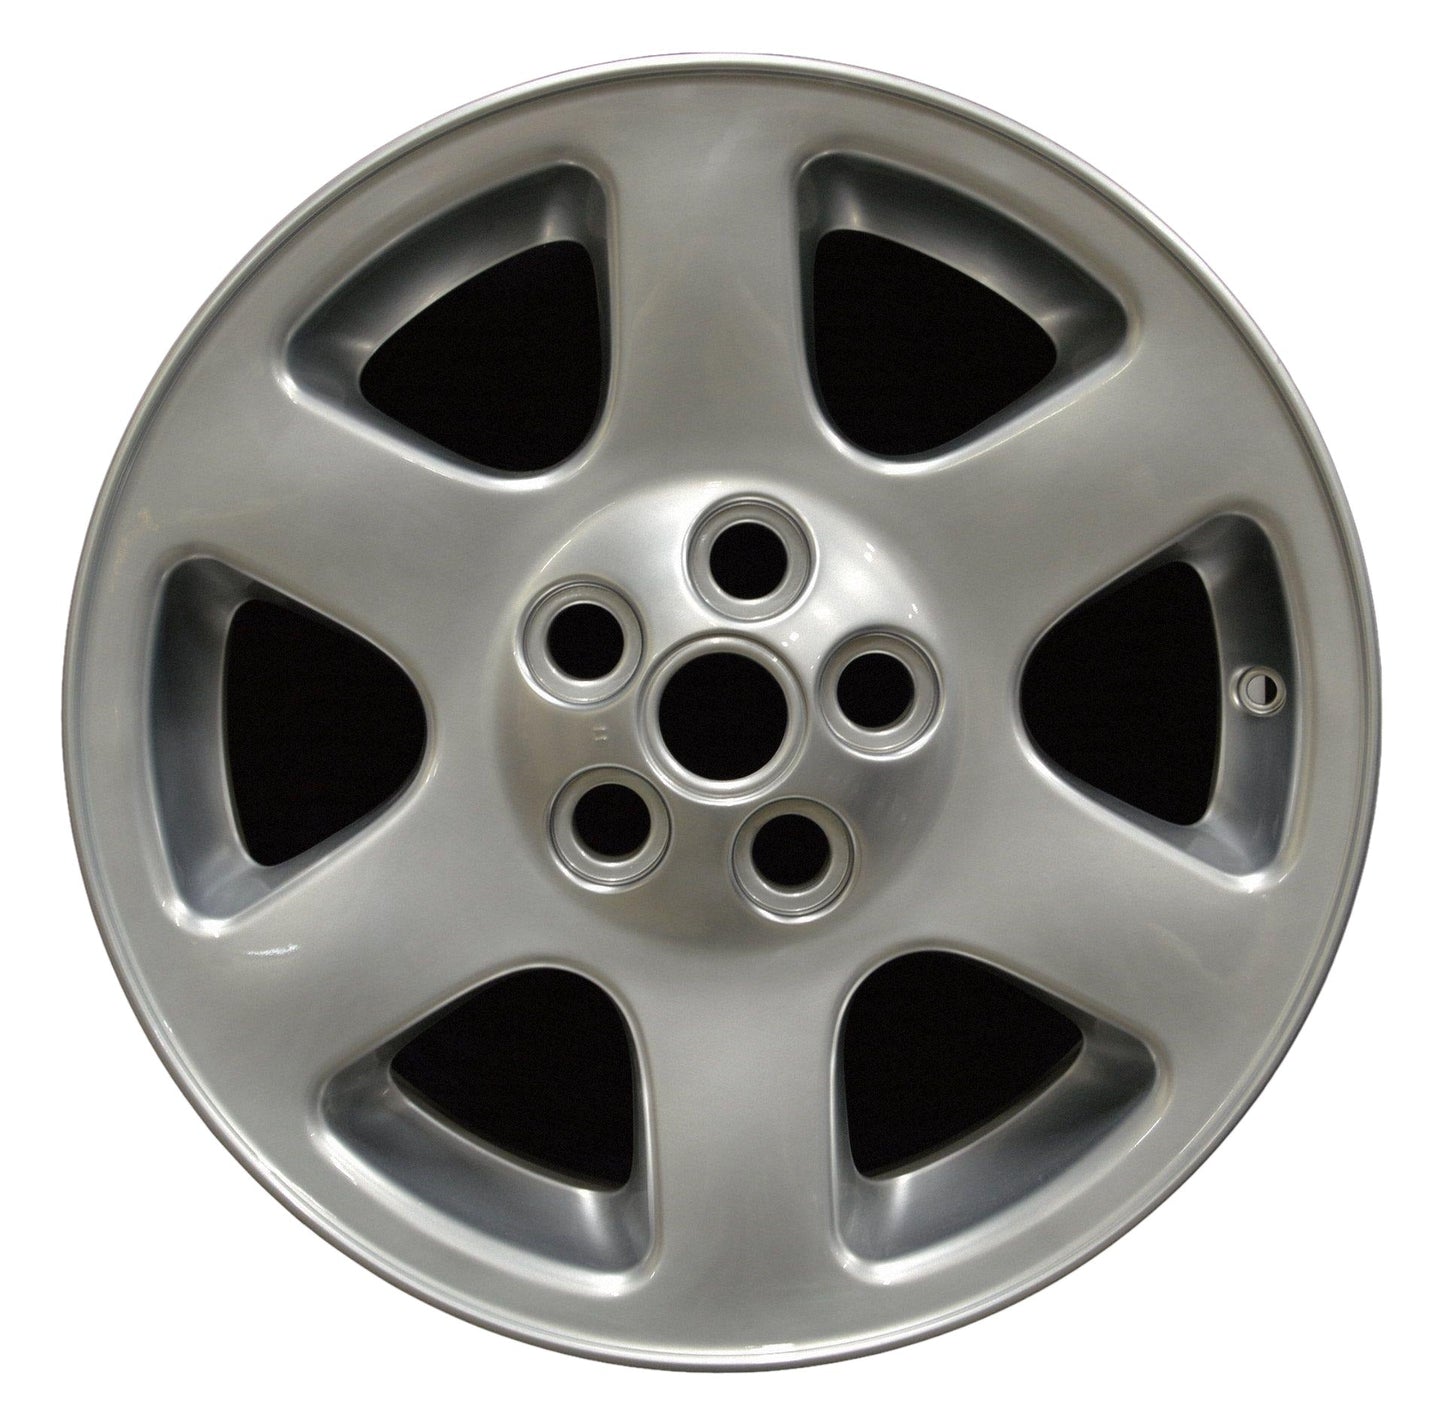 Land Rover Discovery  2003, 2004 Factory OEM Car Wheel Size 18x8 Alloy WAO.72178.HYPV1.FF